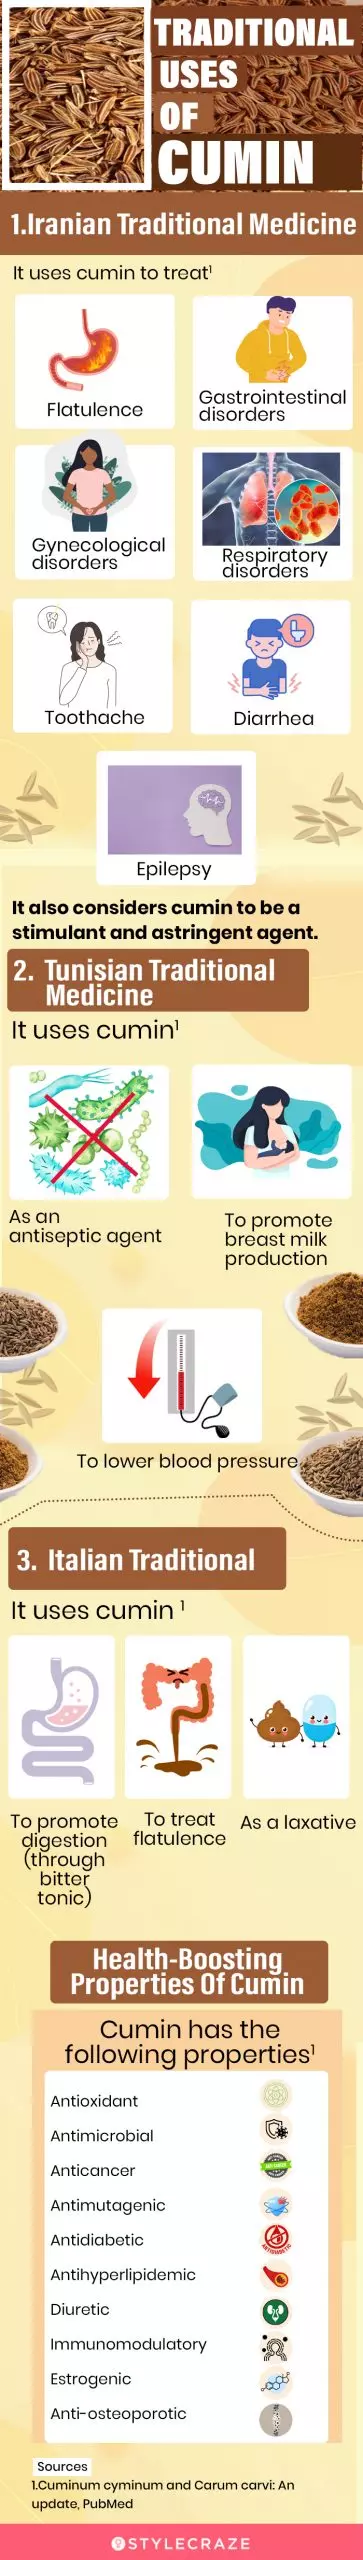 traditional uses of cumin (infographic)